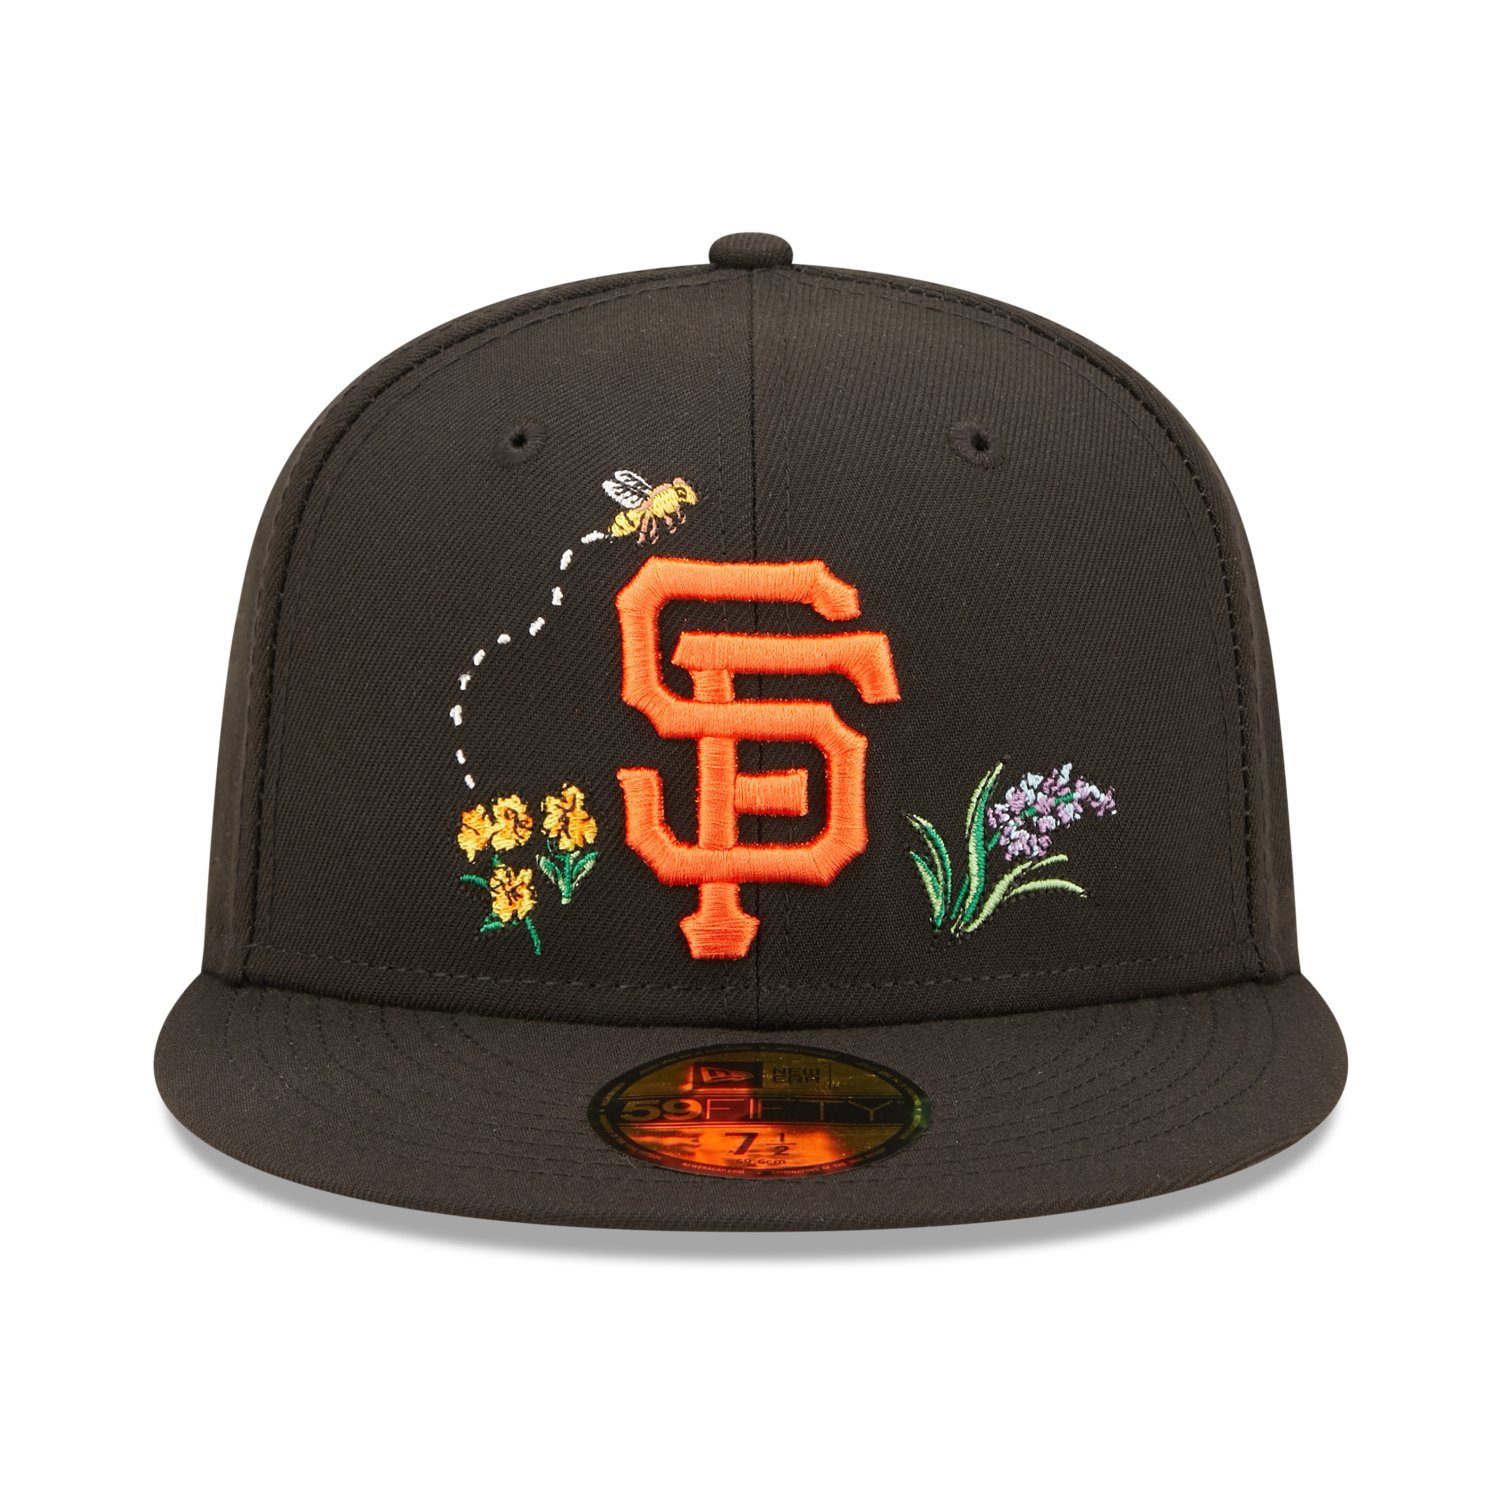 FLORAL New Giants San WATER Era Fitted Cap Francisco 59Fifty